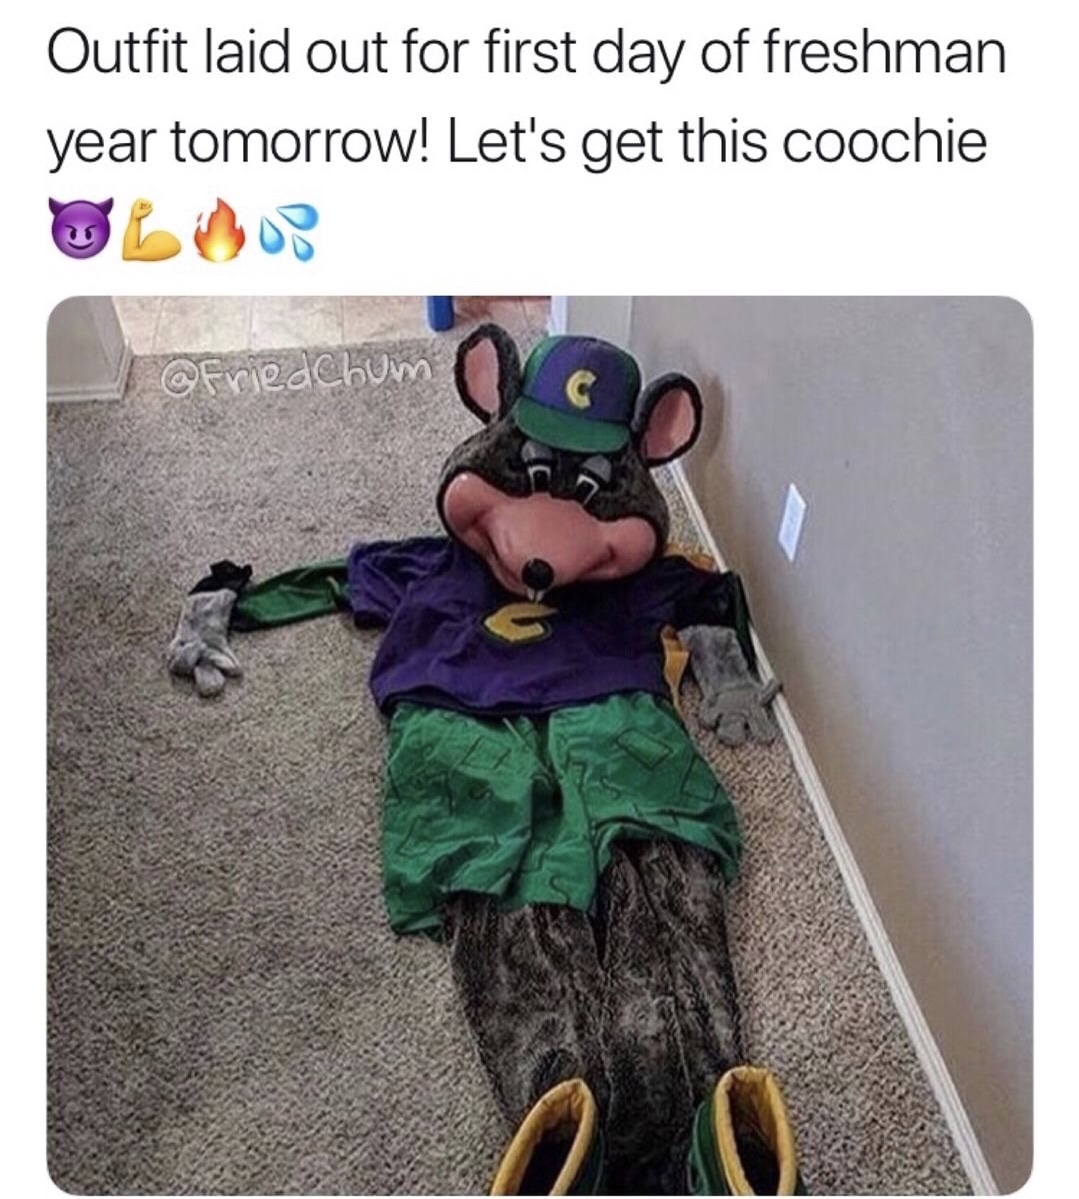 dank let's get this coochie - Outfit laid out for first day of freshman year tomorrow! Let's get this coochie Chum